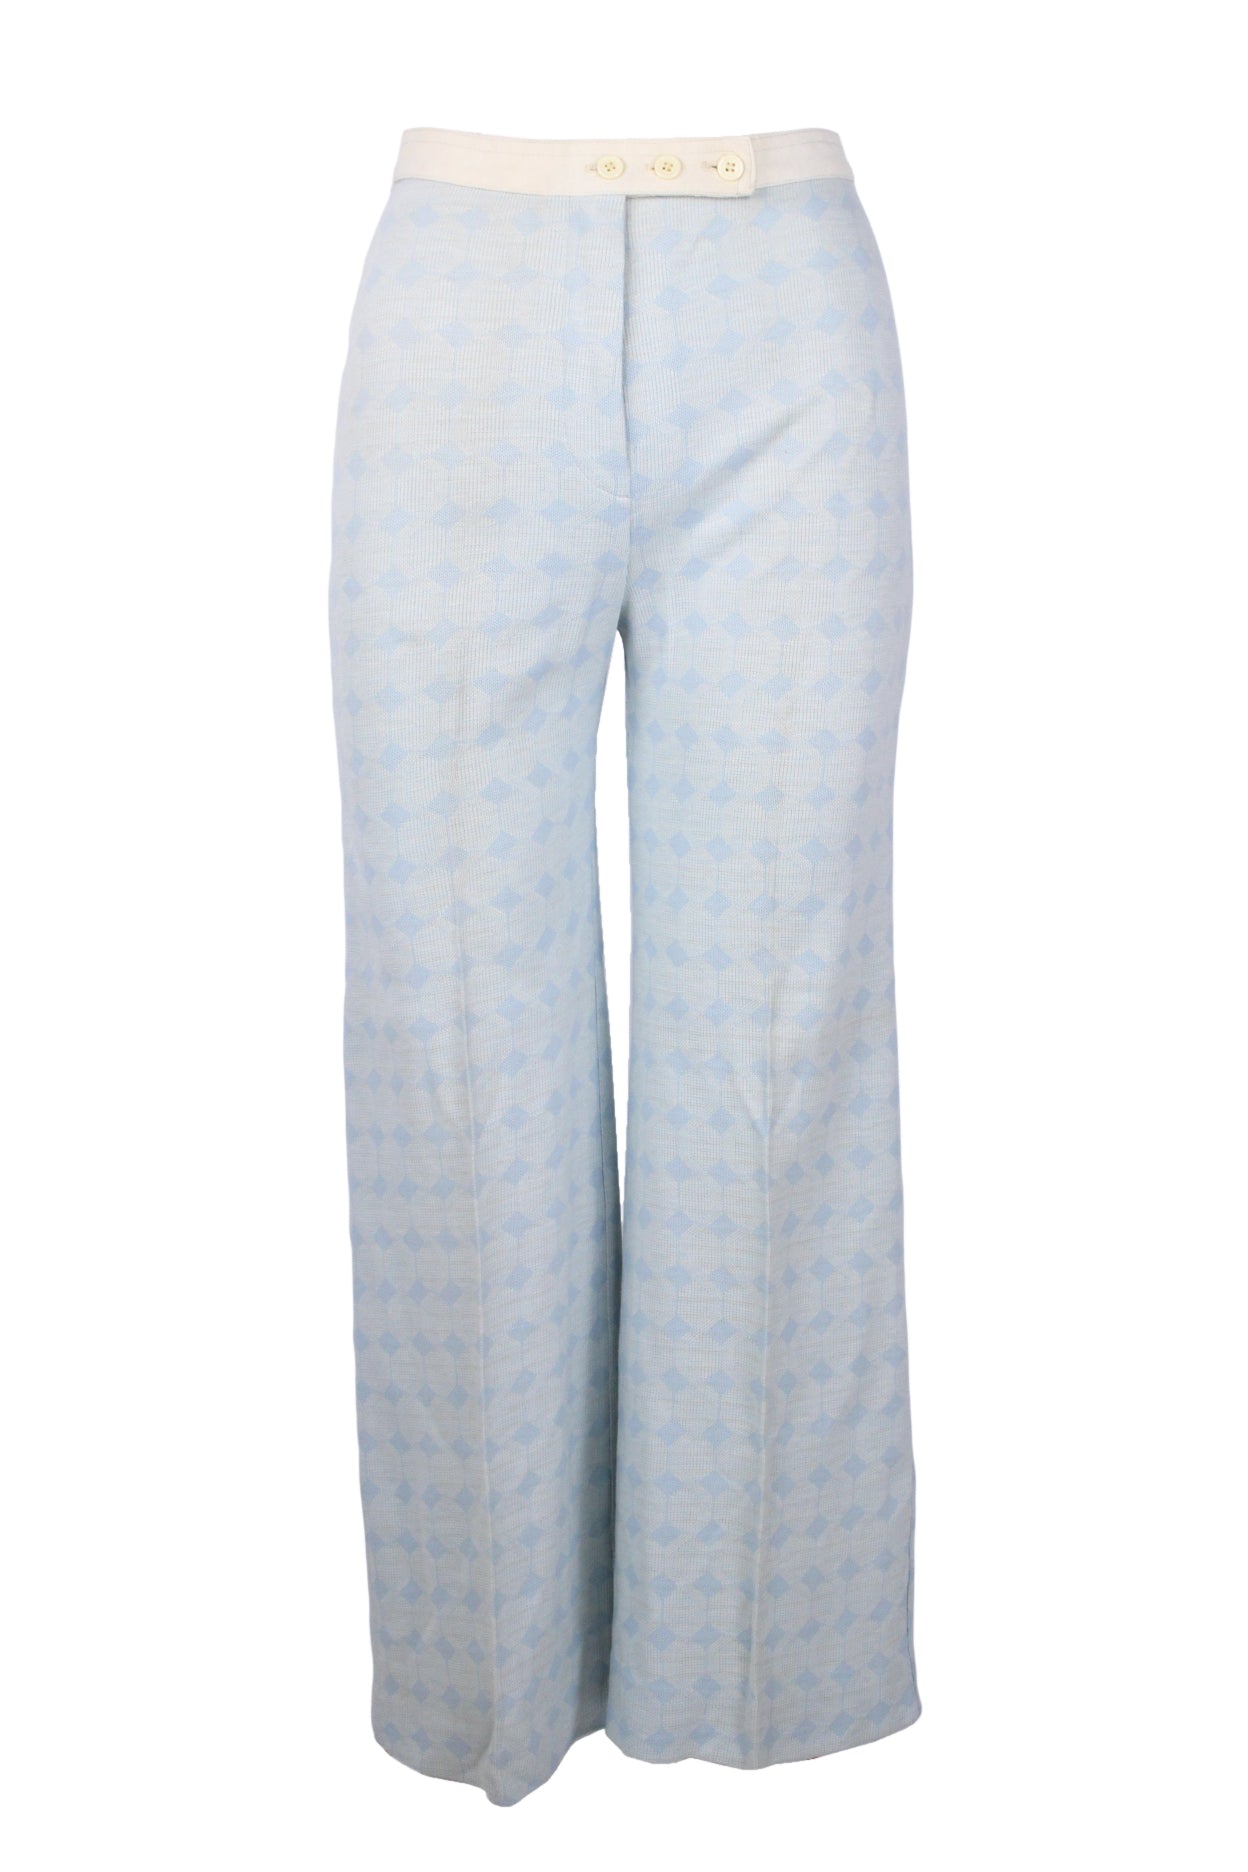 description: vintage b.bs's own stuff blue geometric print pants. features high waisted, straight leg style, button closure at waist, zip fly, and beige waistband. 